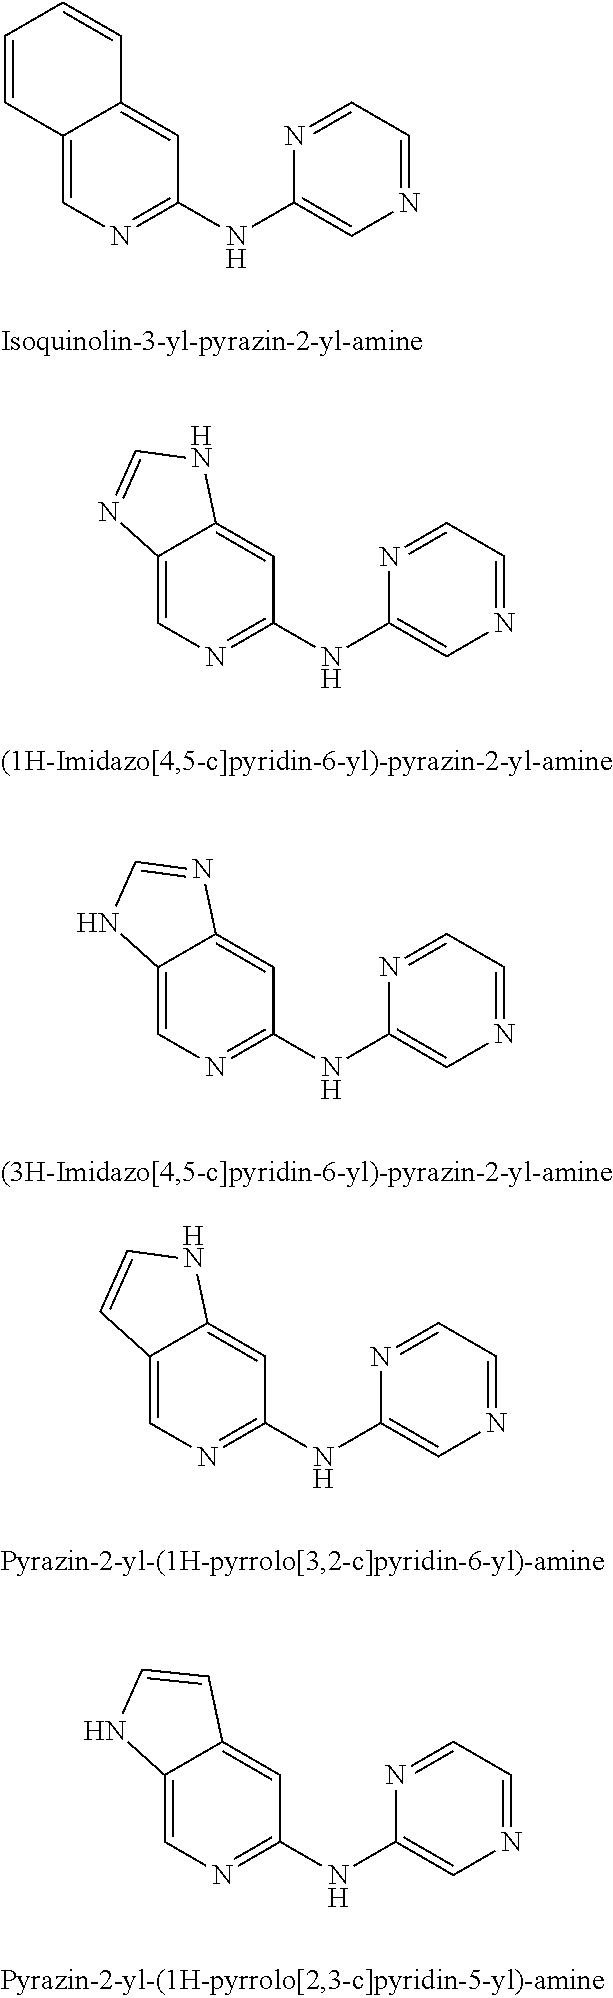 Bicyclylaryl-aryl-amine compounds and their use